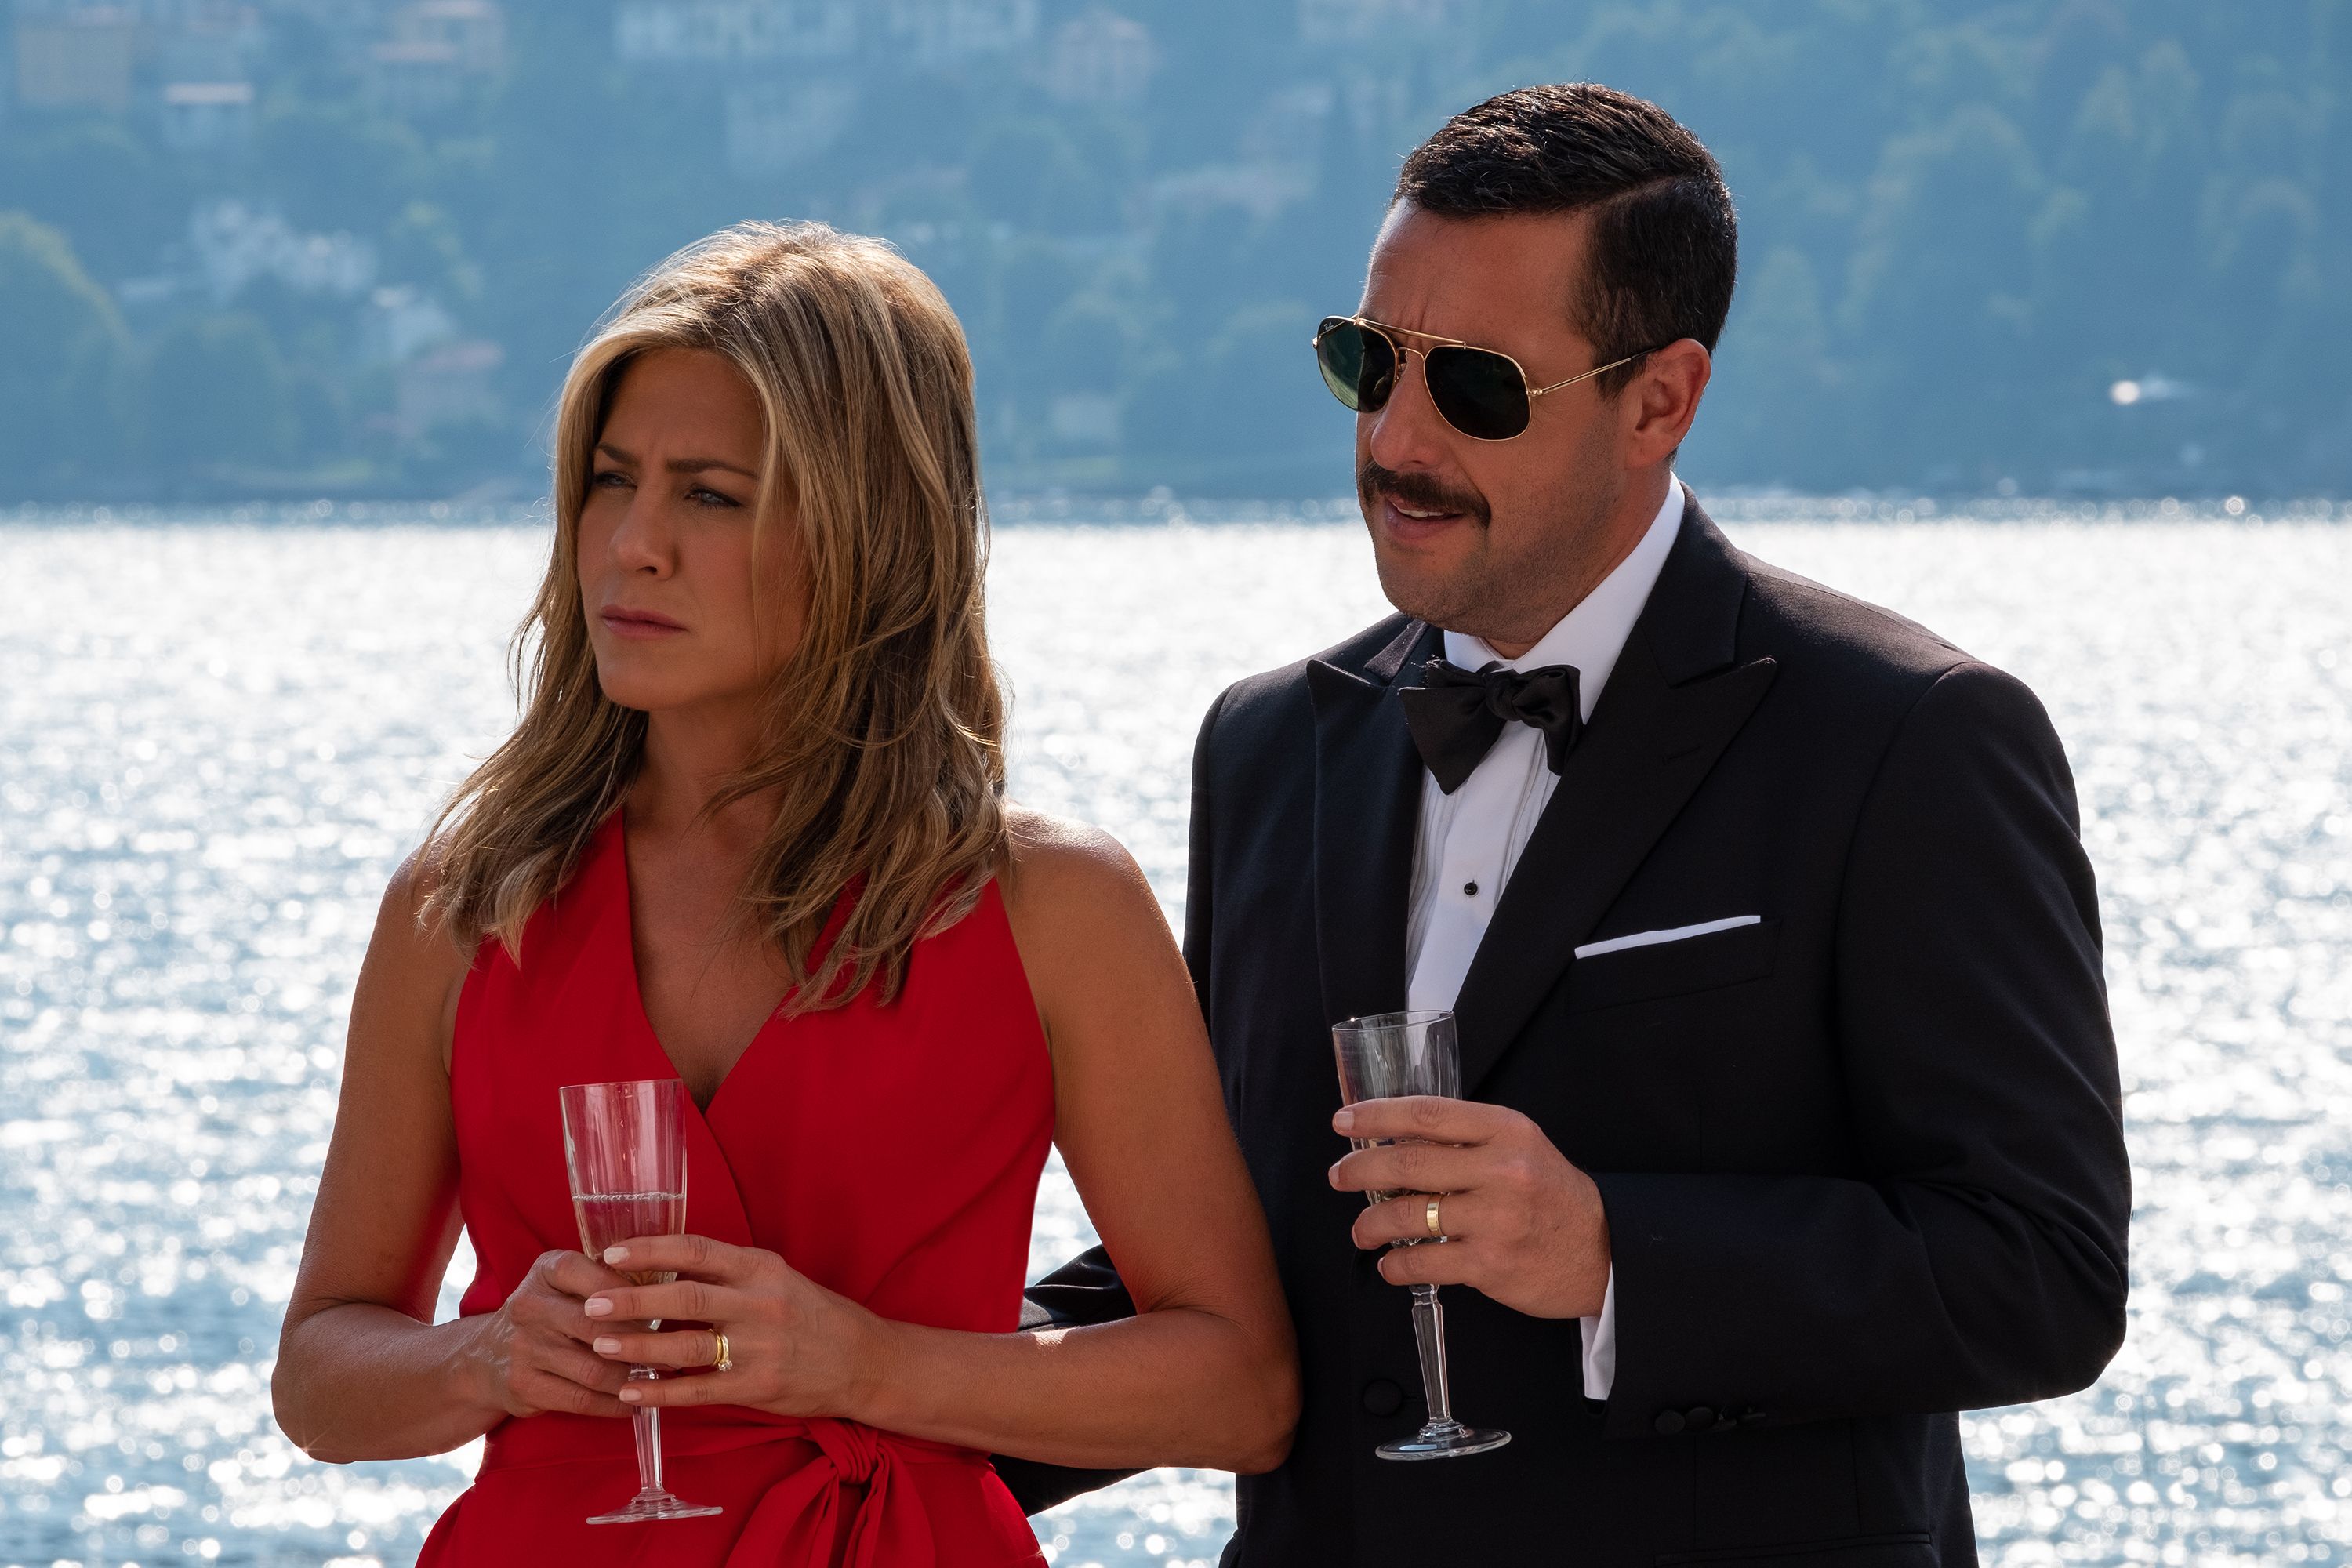 Jennifer Aniston and Adam Sandler seen in new images for Murder Mystery 2